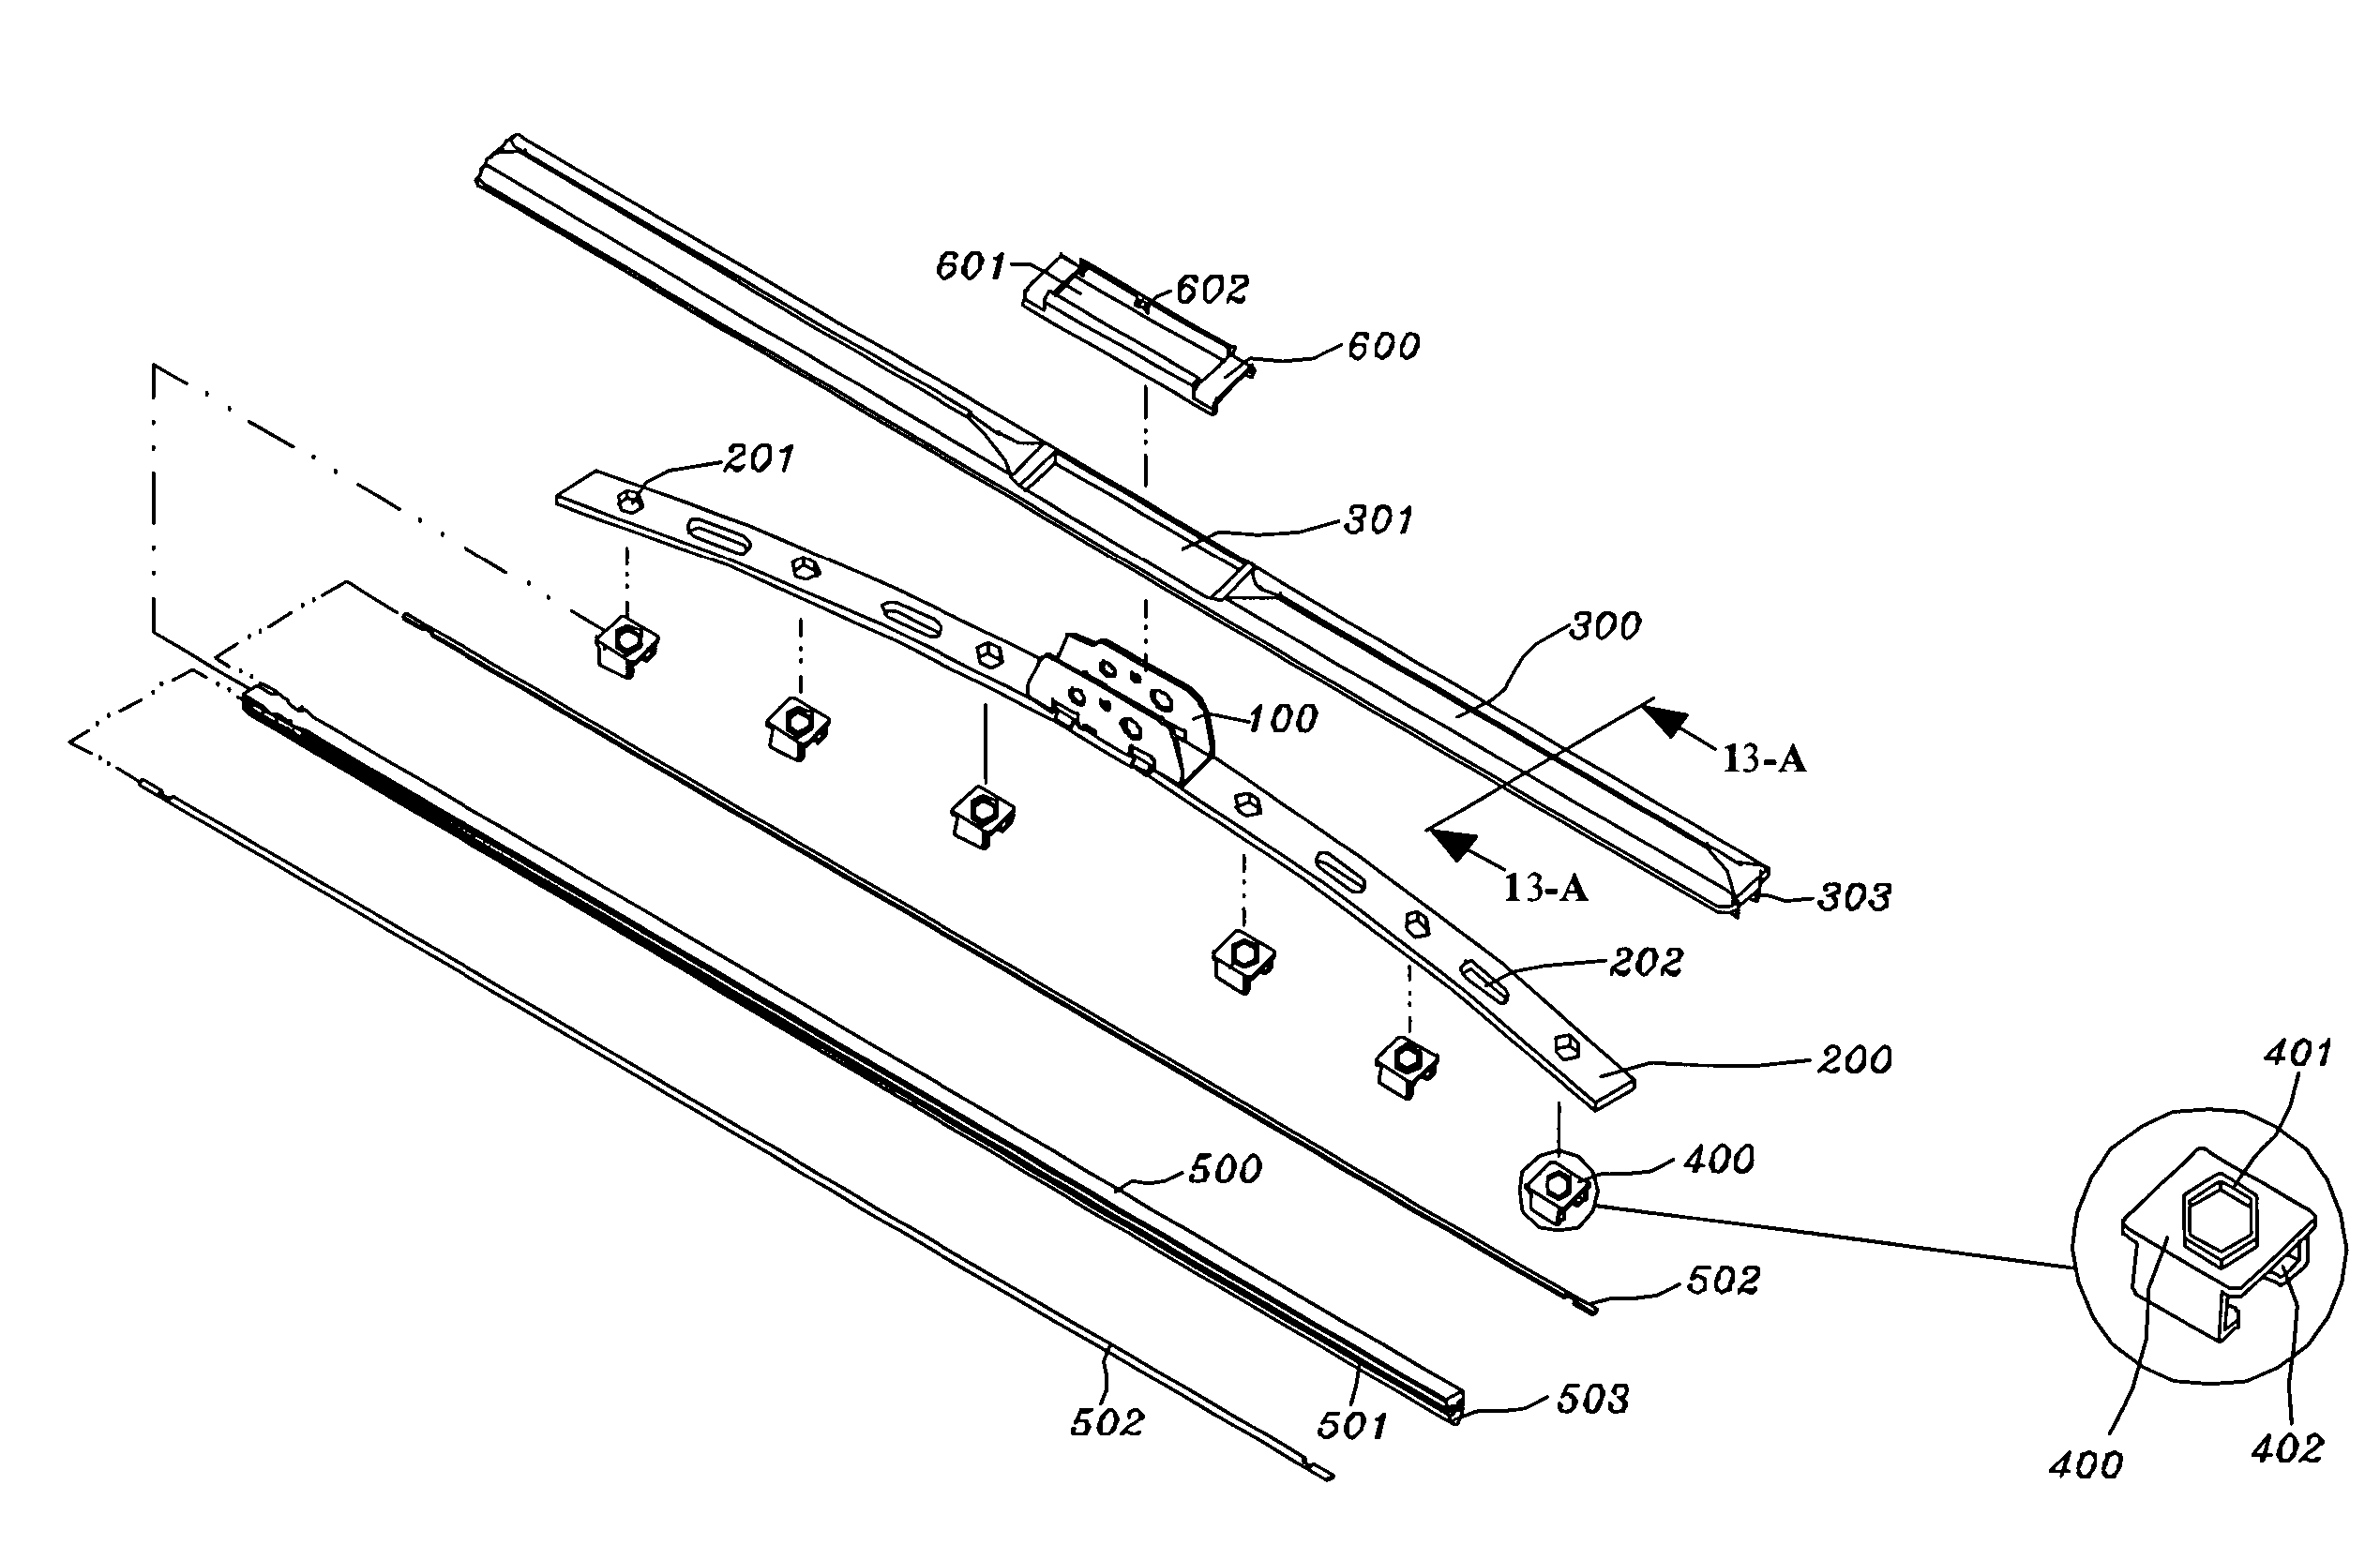 Windshield wiper structure for vehicles